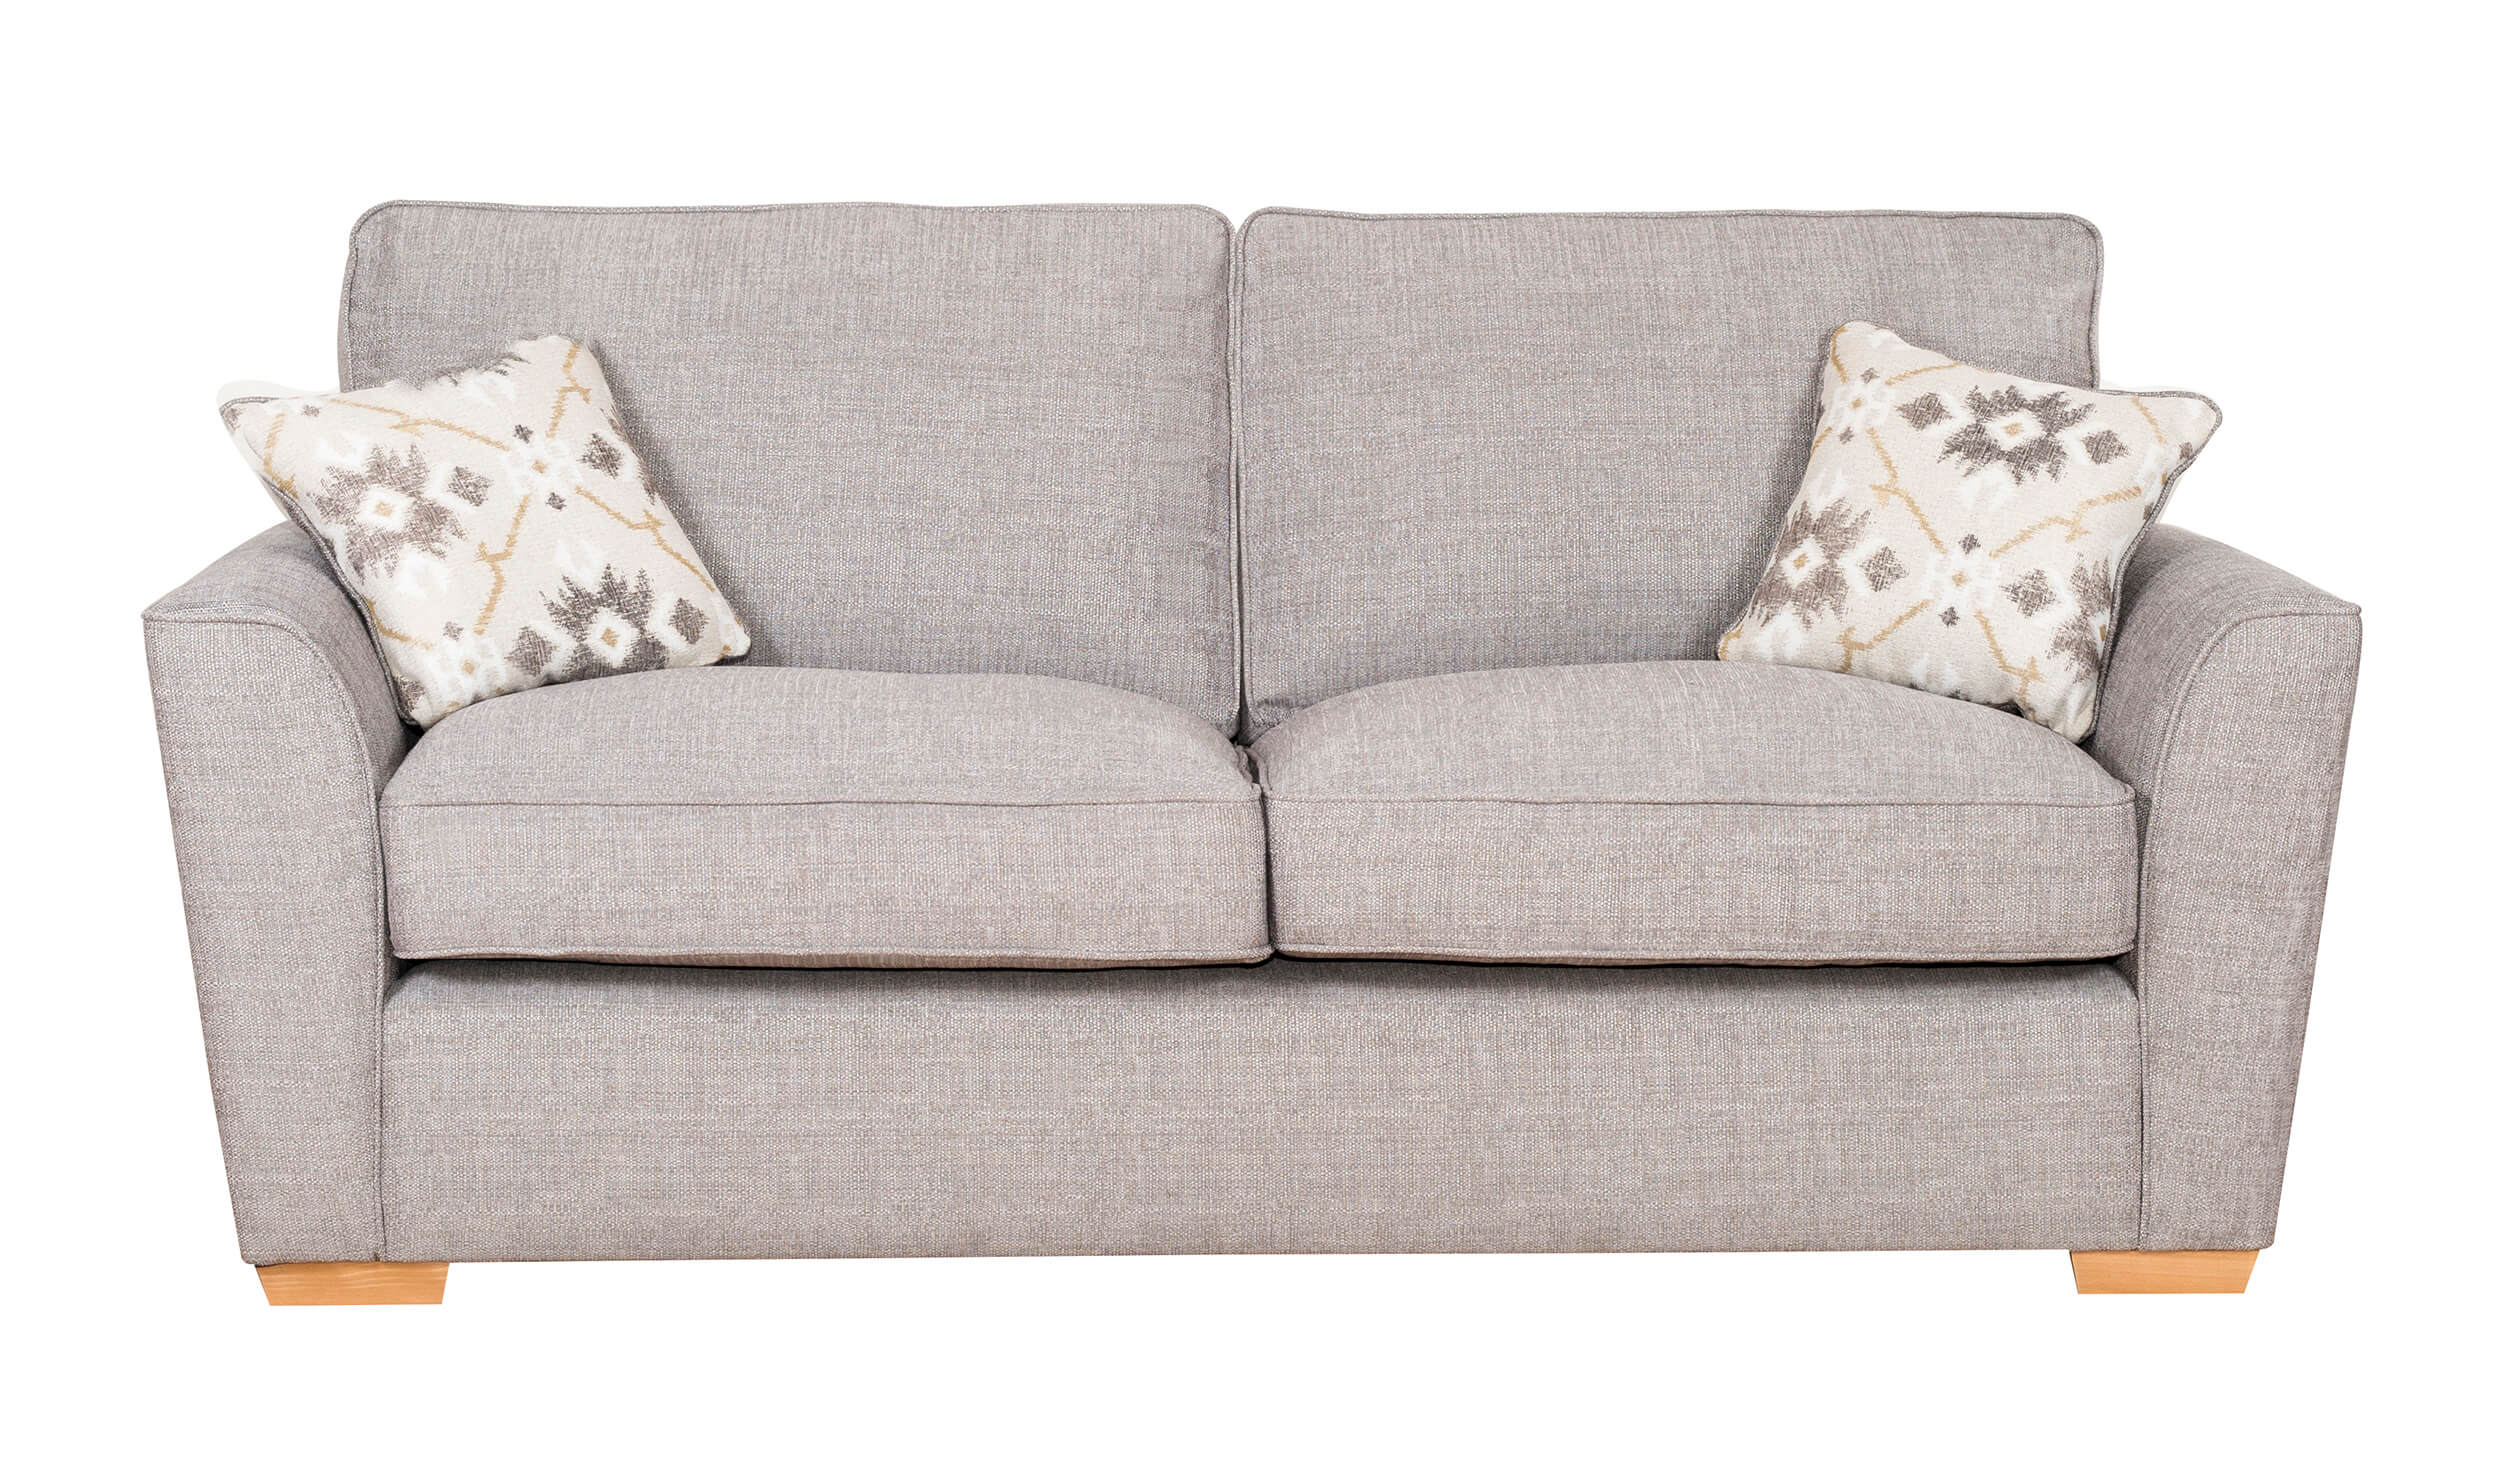 Showing image for Ellsworth 3-seater sofa